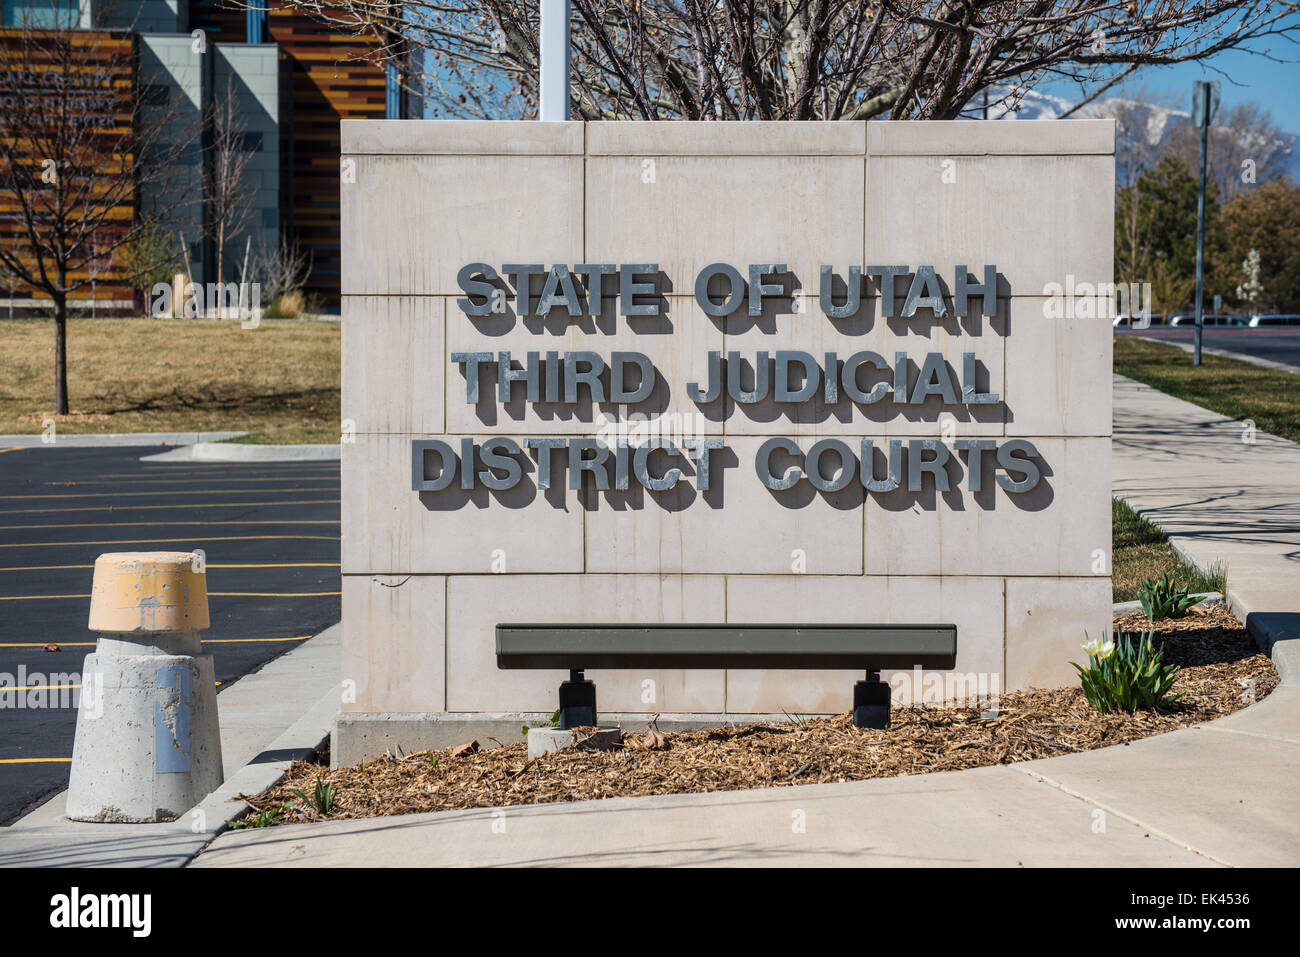 State of Utah Third Judicial District Courts Sign Stock Photo